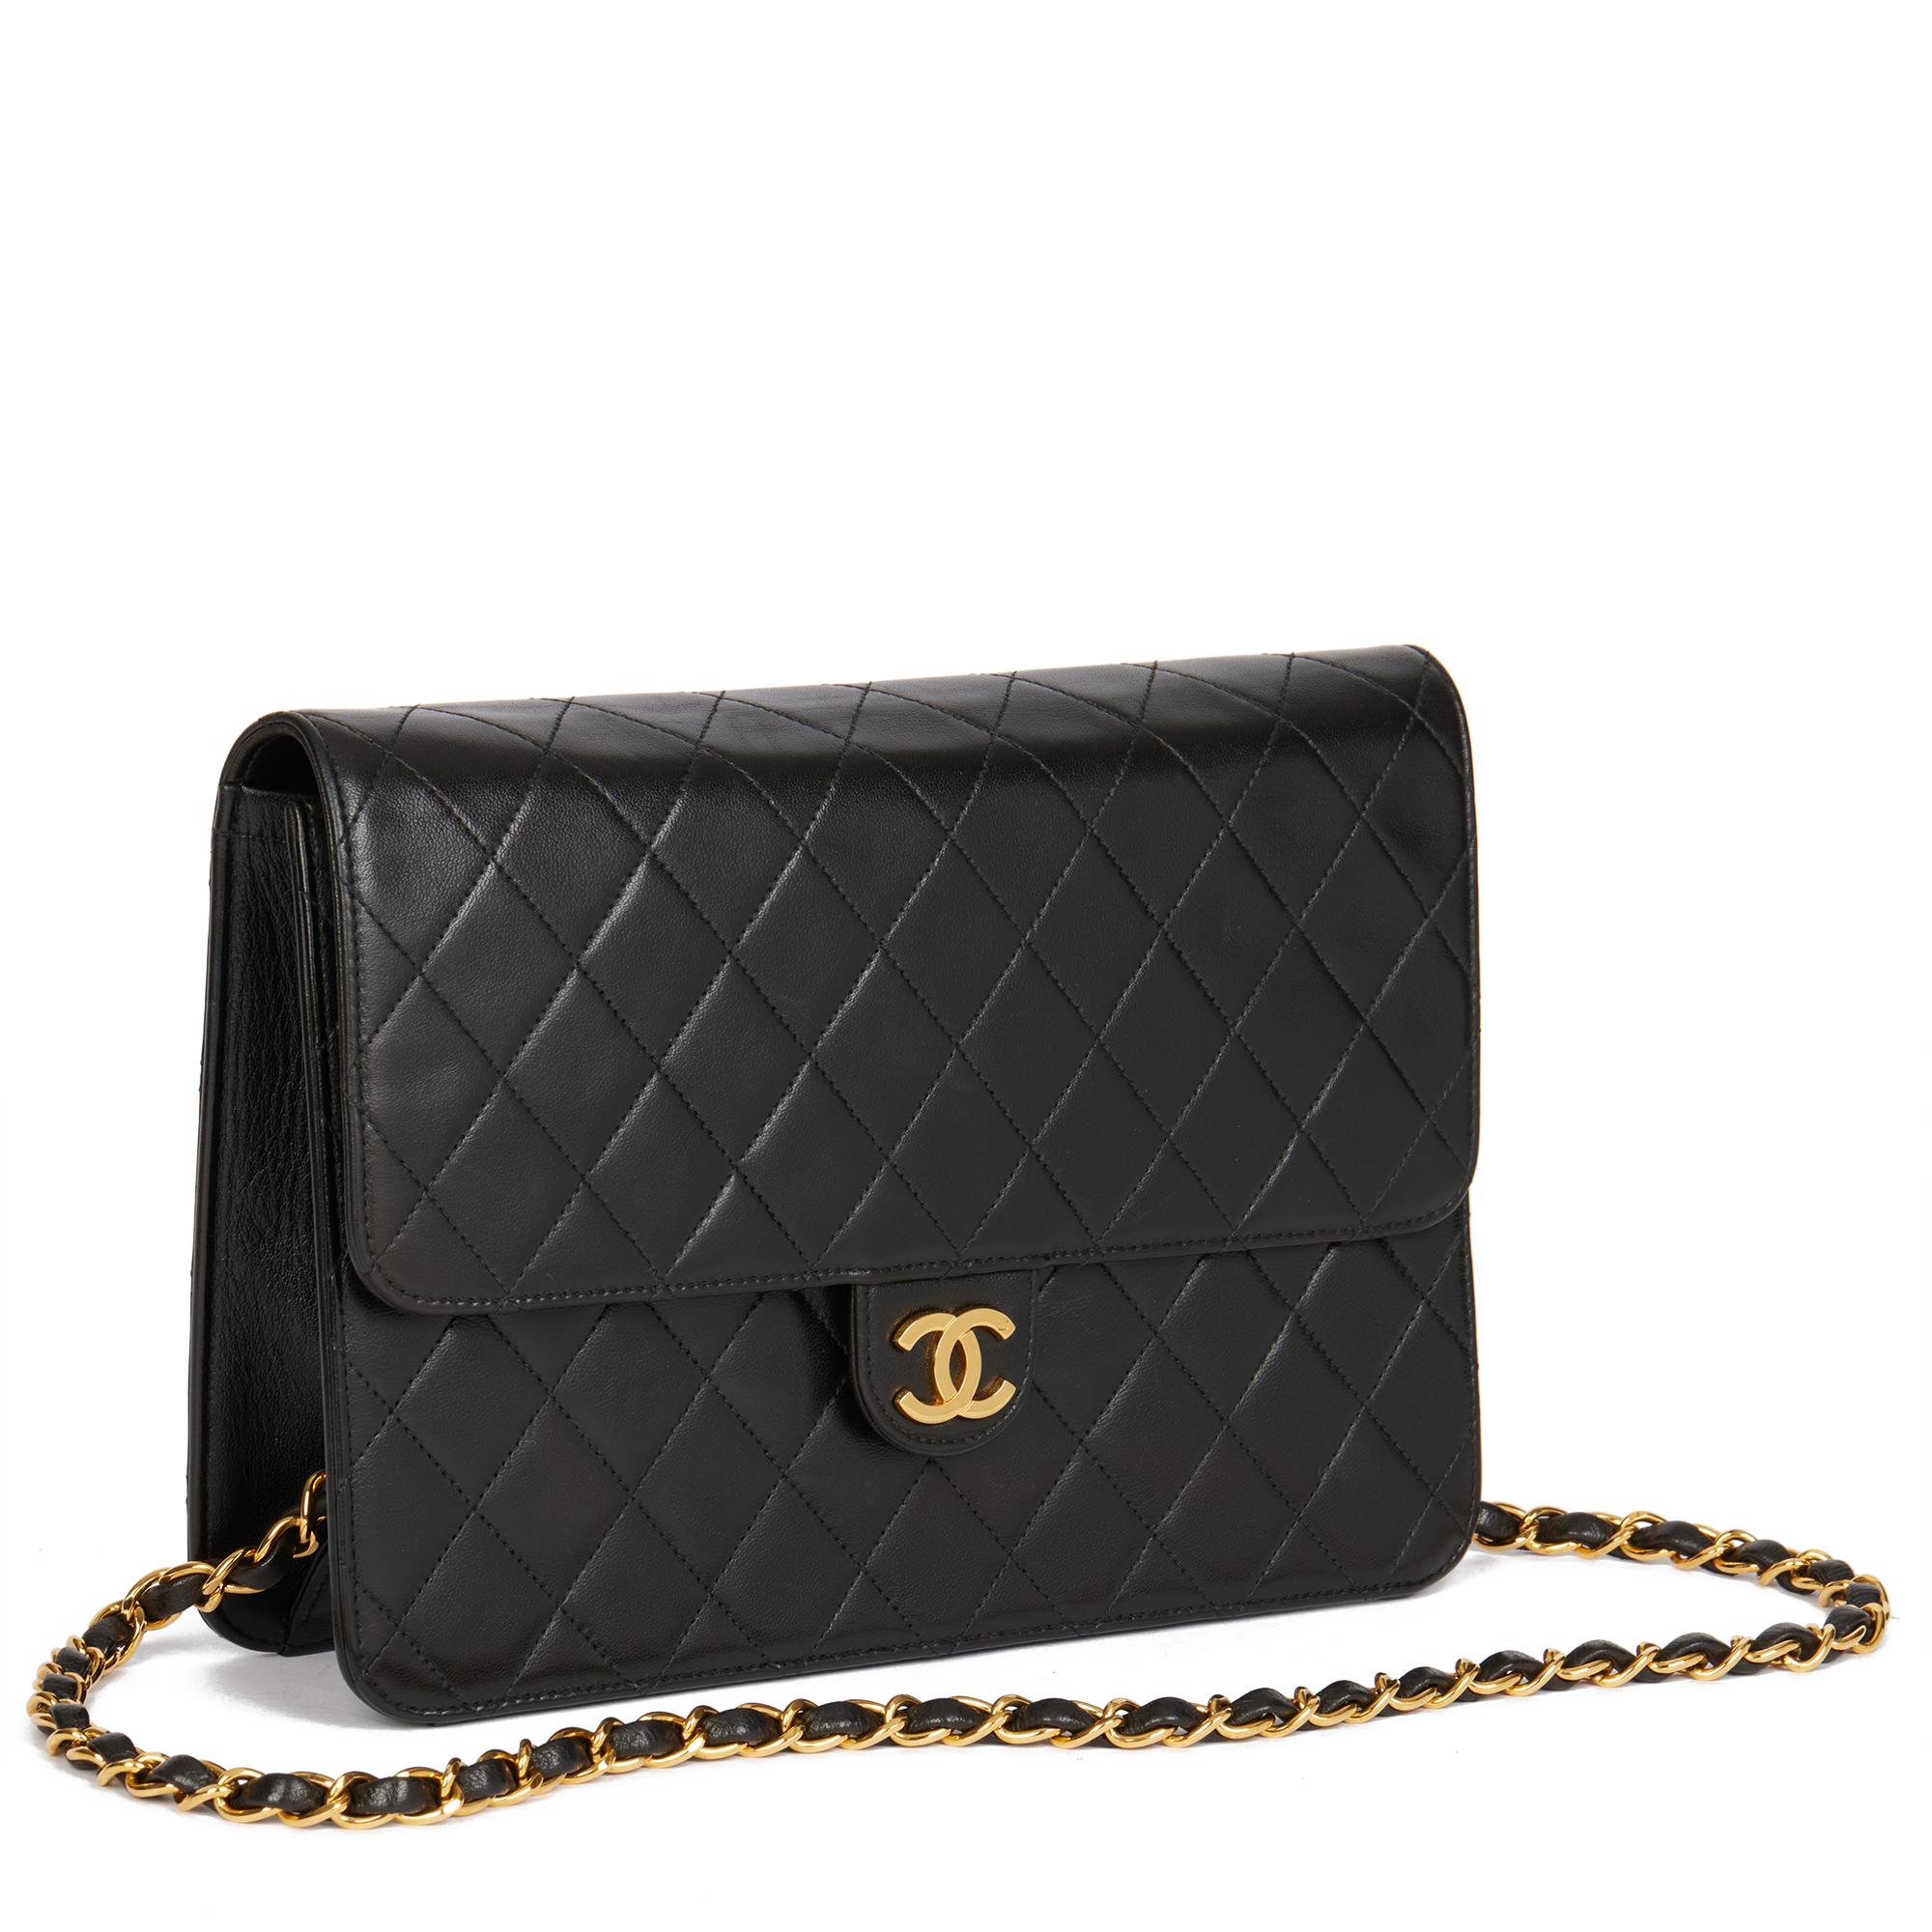 CHANEL
Black Quilted Lambskin Vintage Medium Classic Single Flap Bag

Xupes Reference: HB4646
Serial Number: 5144668
Age (Circa): 1997
Accompanied By: Chanel Dust Bag, Authenticity Card, Care Booklet
Authenticity Details: Authenticity Card, Serial